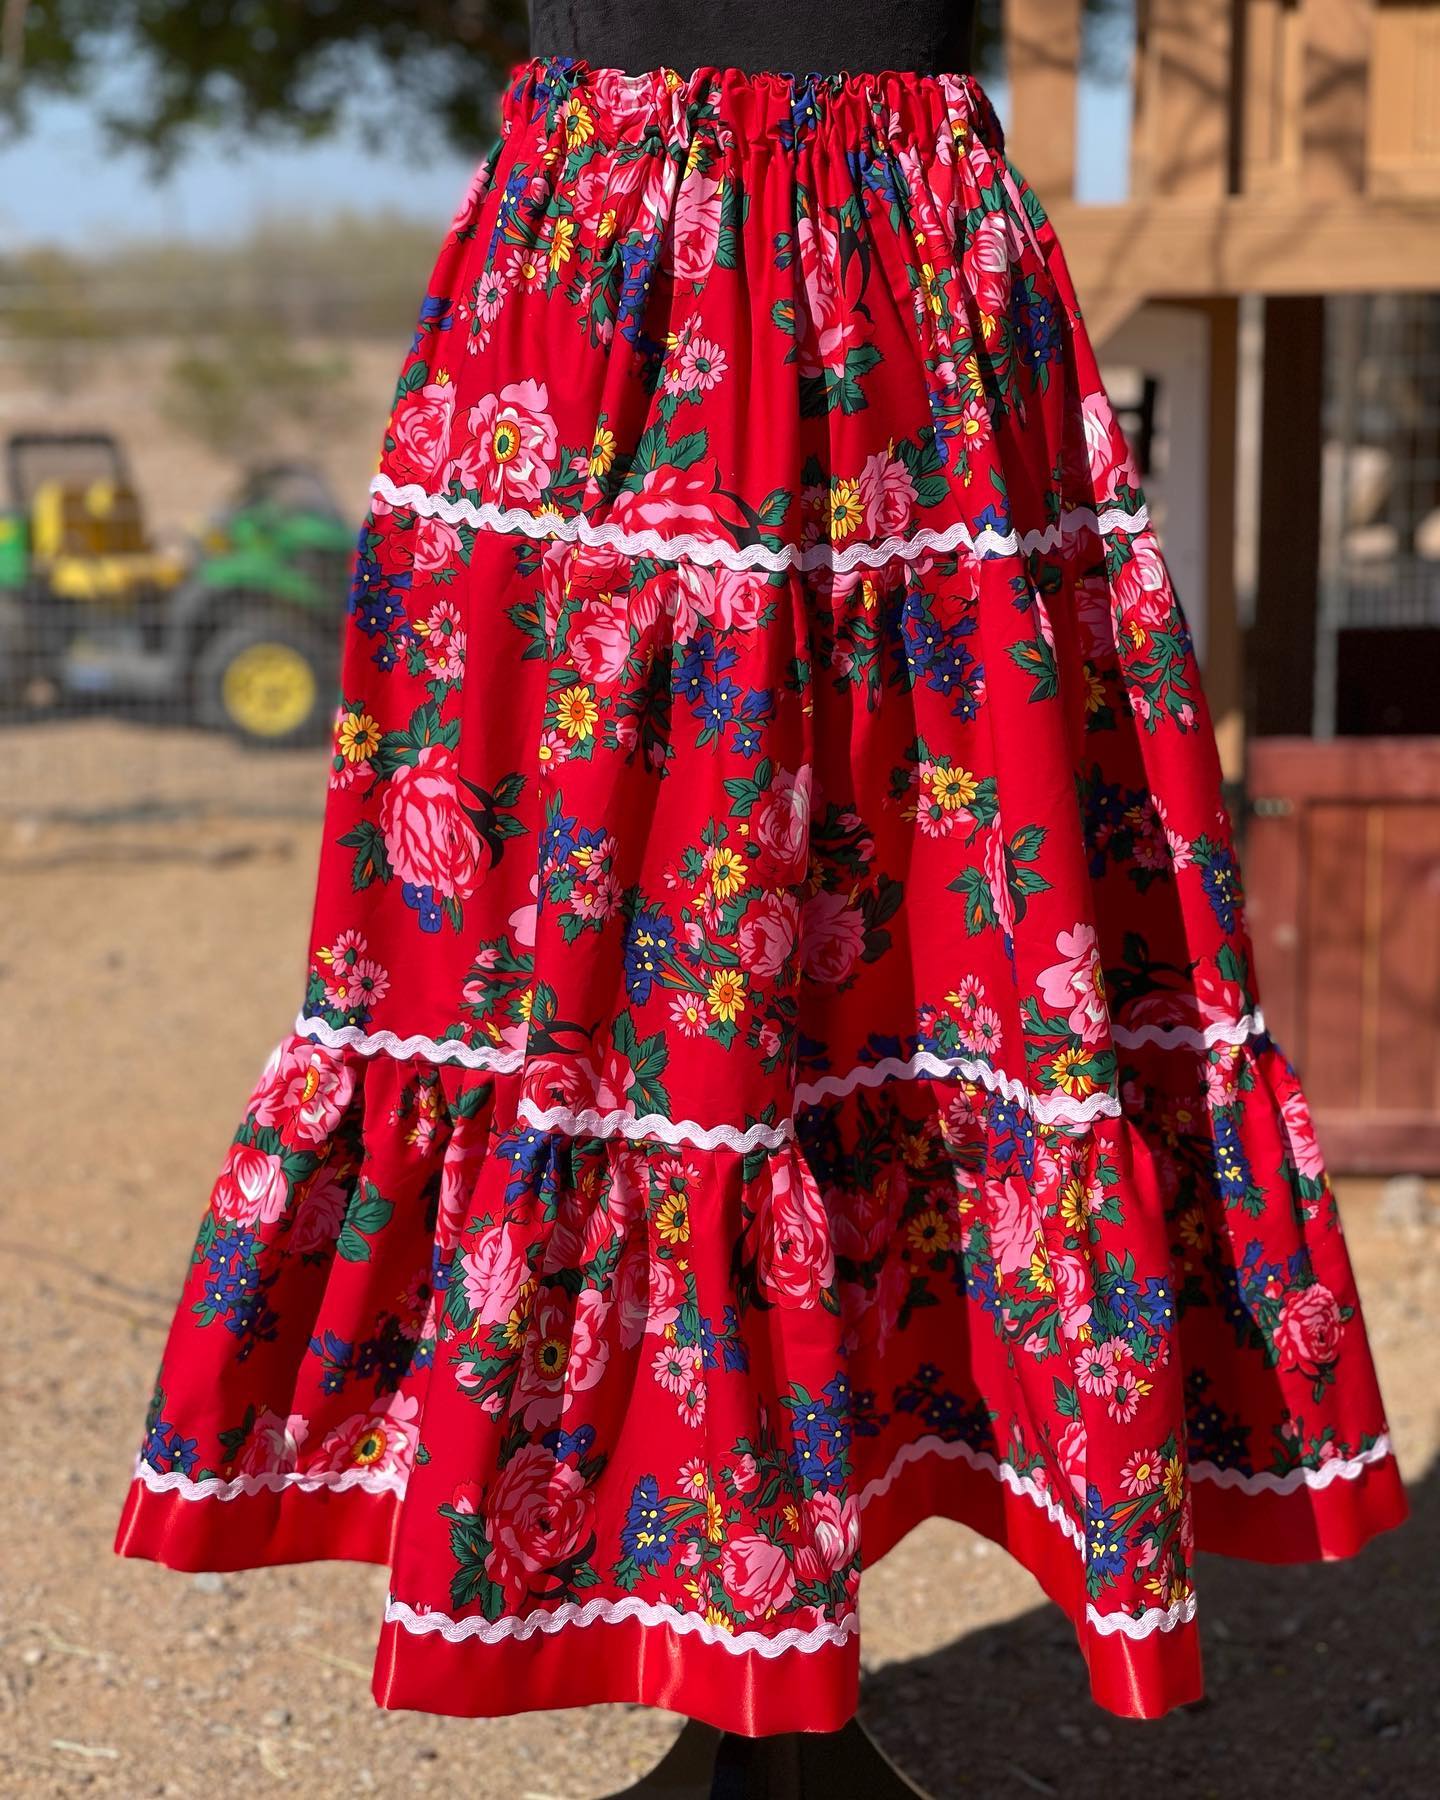 Close-up of a bright tiered skirt